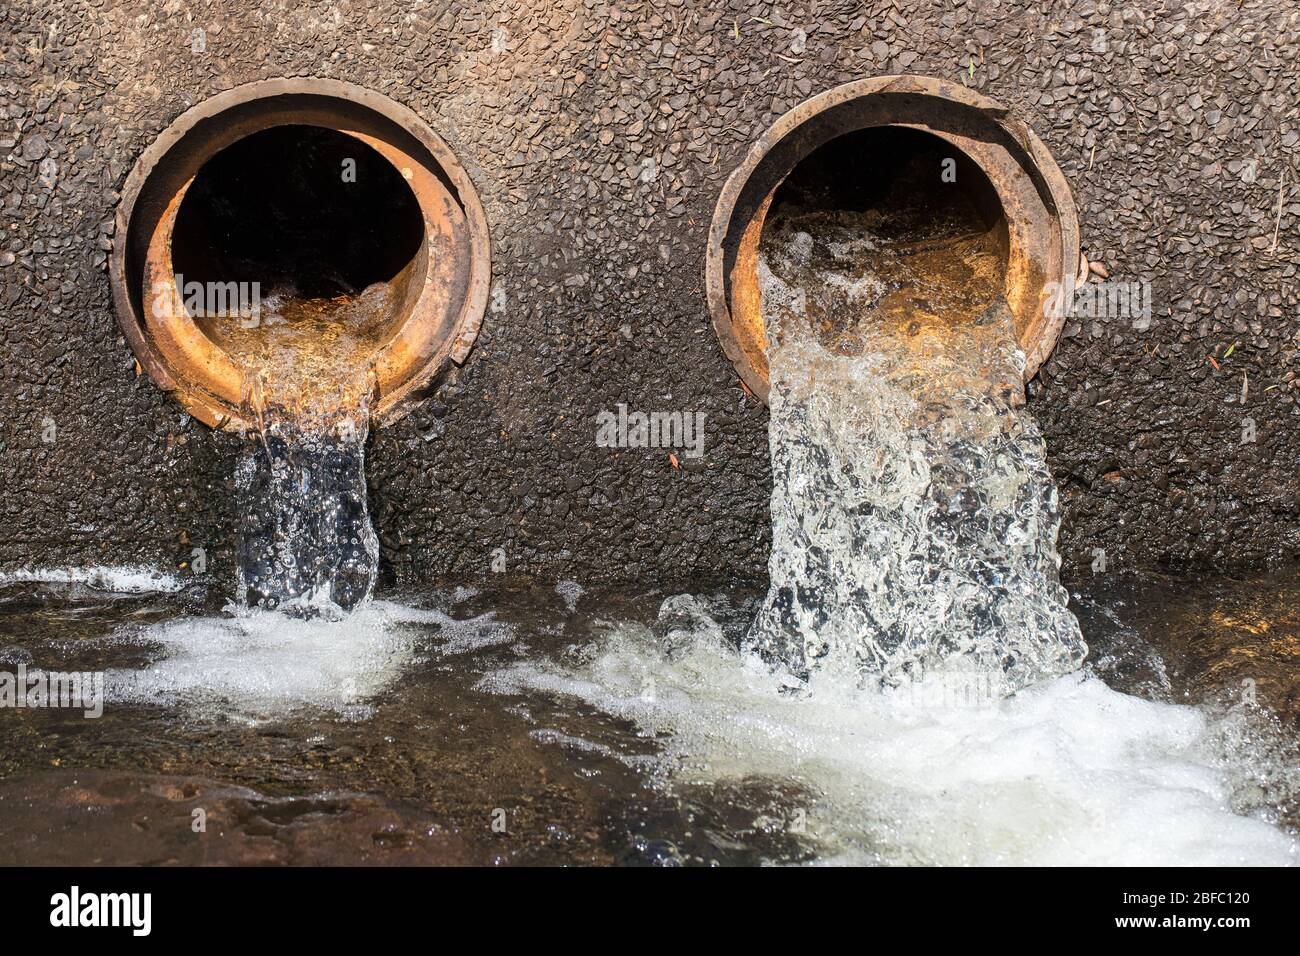 Water flowing from pipes under causeway on road Stock Photo